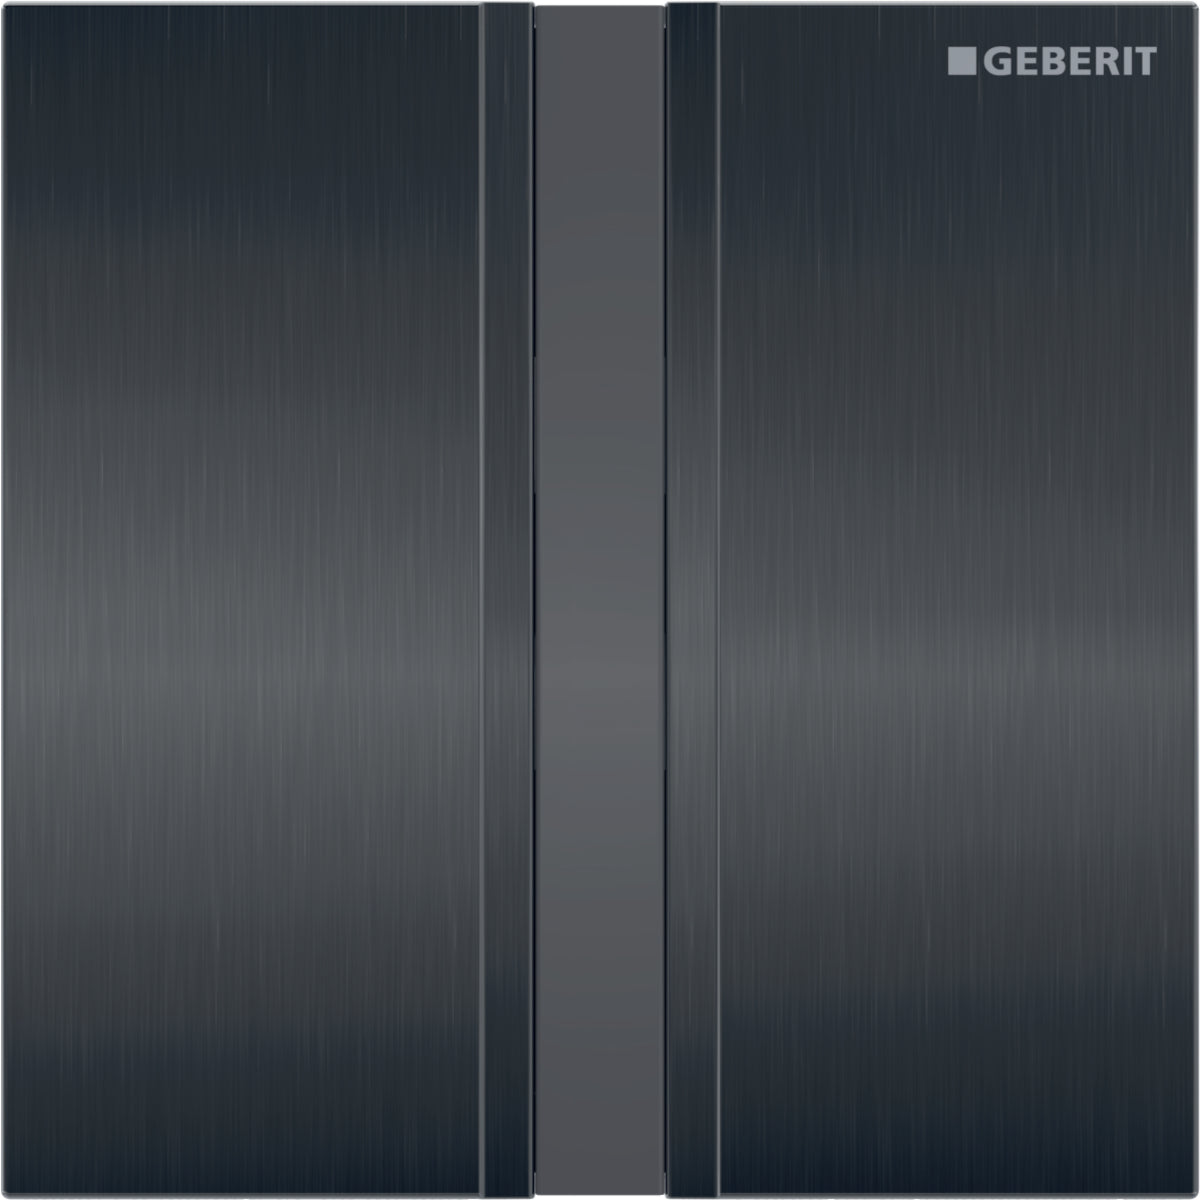 Geberit Urinal Flush Control with Electronic Flush Actuation, Mains Operation and Type 50 Cover Plate